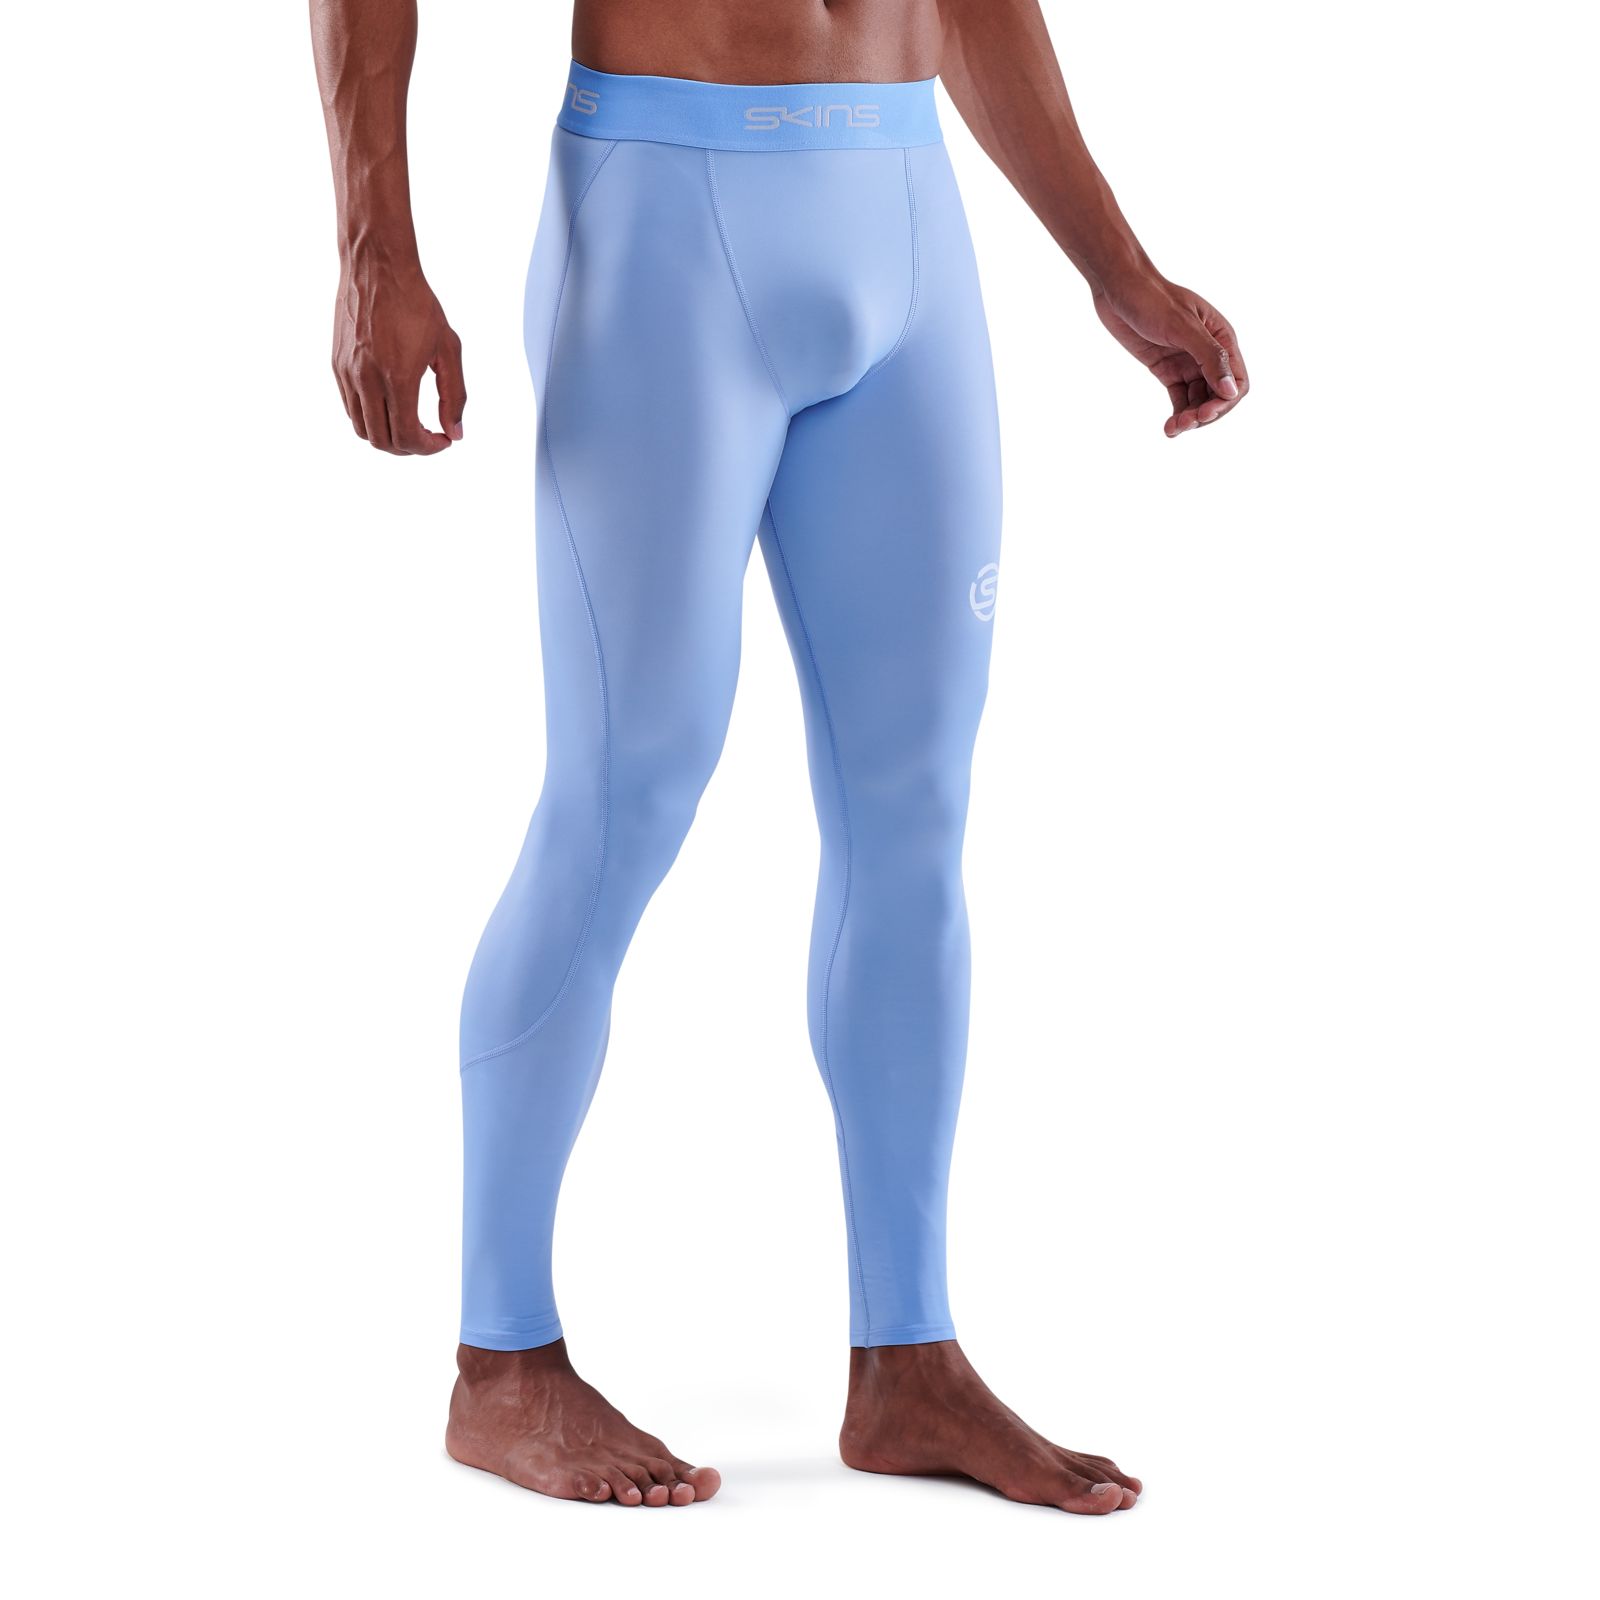 MEN'S LITE-SHOW TIGHT, French Blue, Pants & Tights